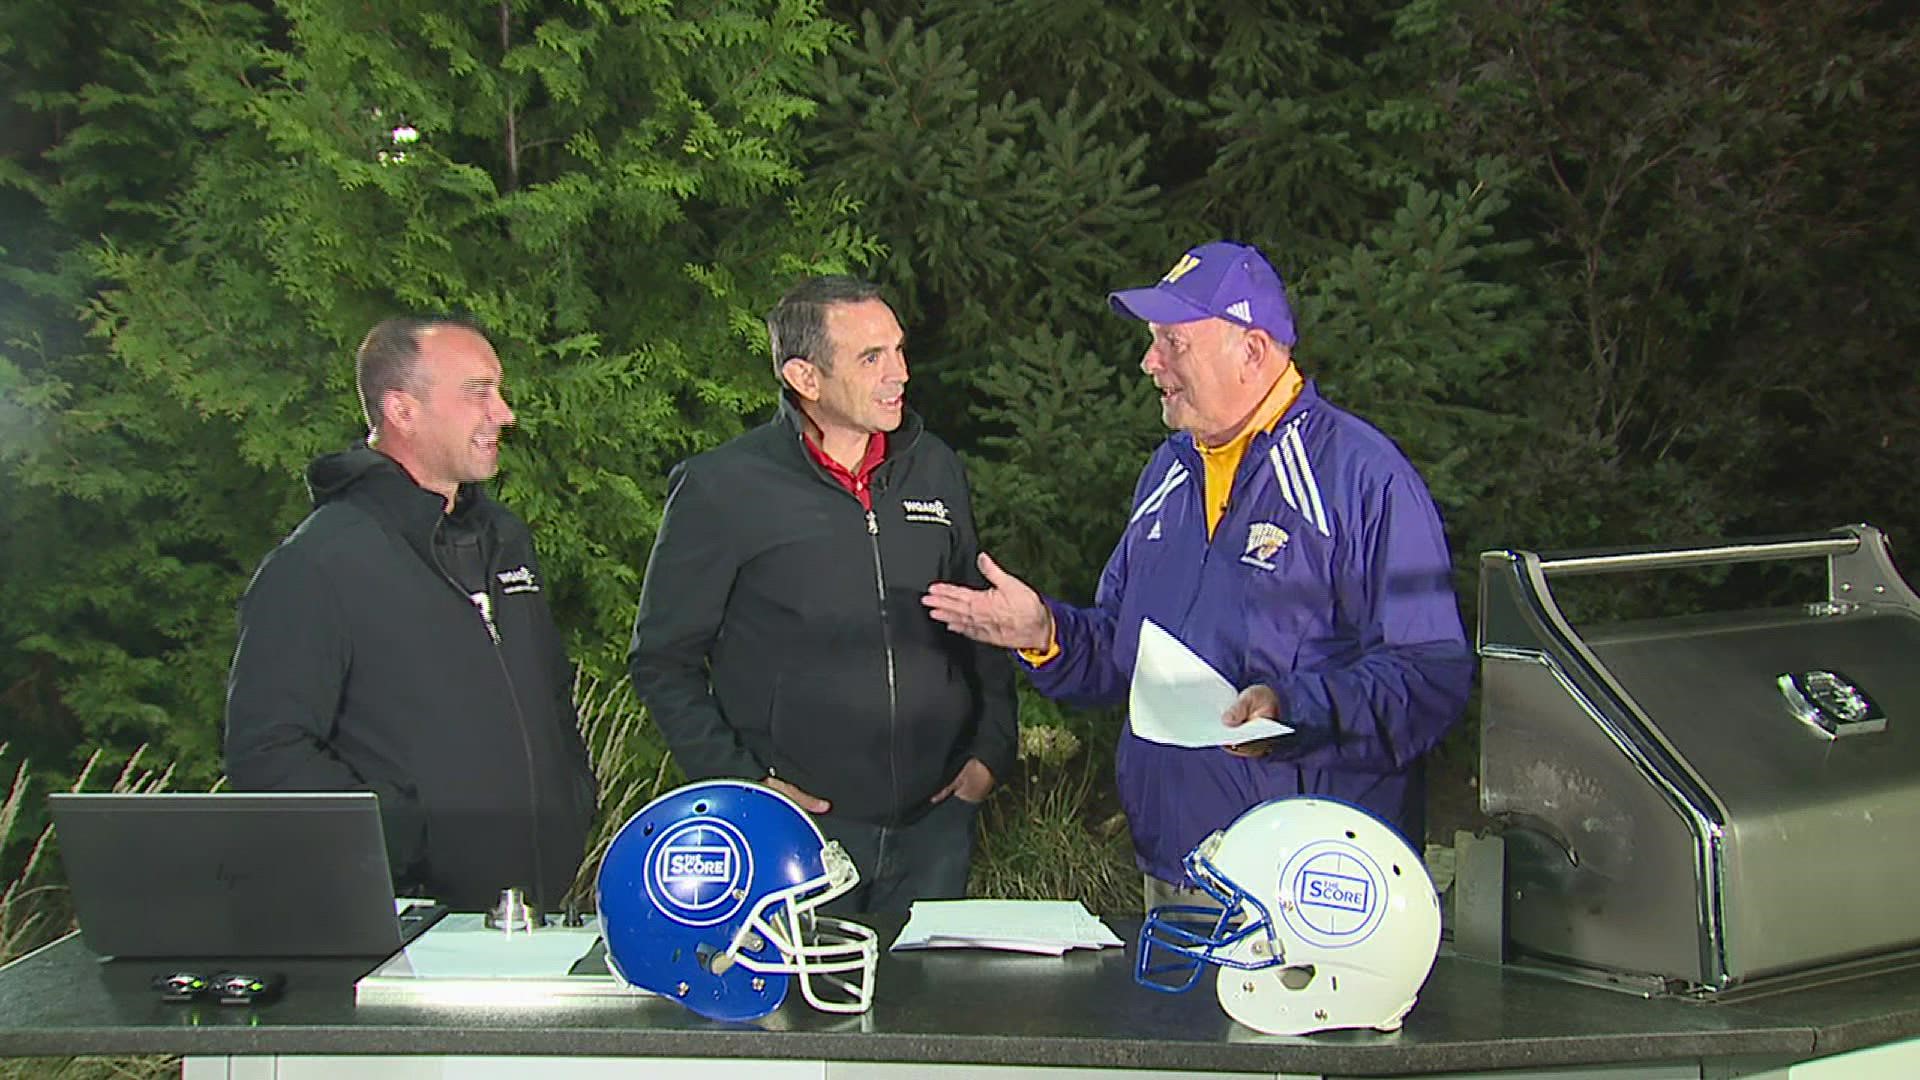 The guest griller for Week 6 of The Score is a familiar face to the WQAD sports team.